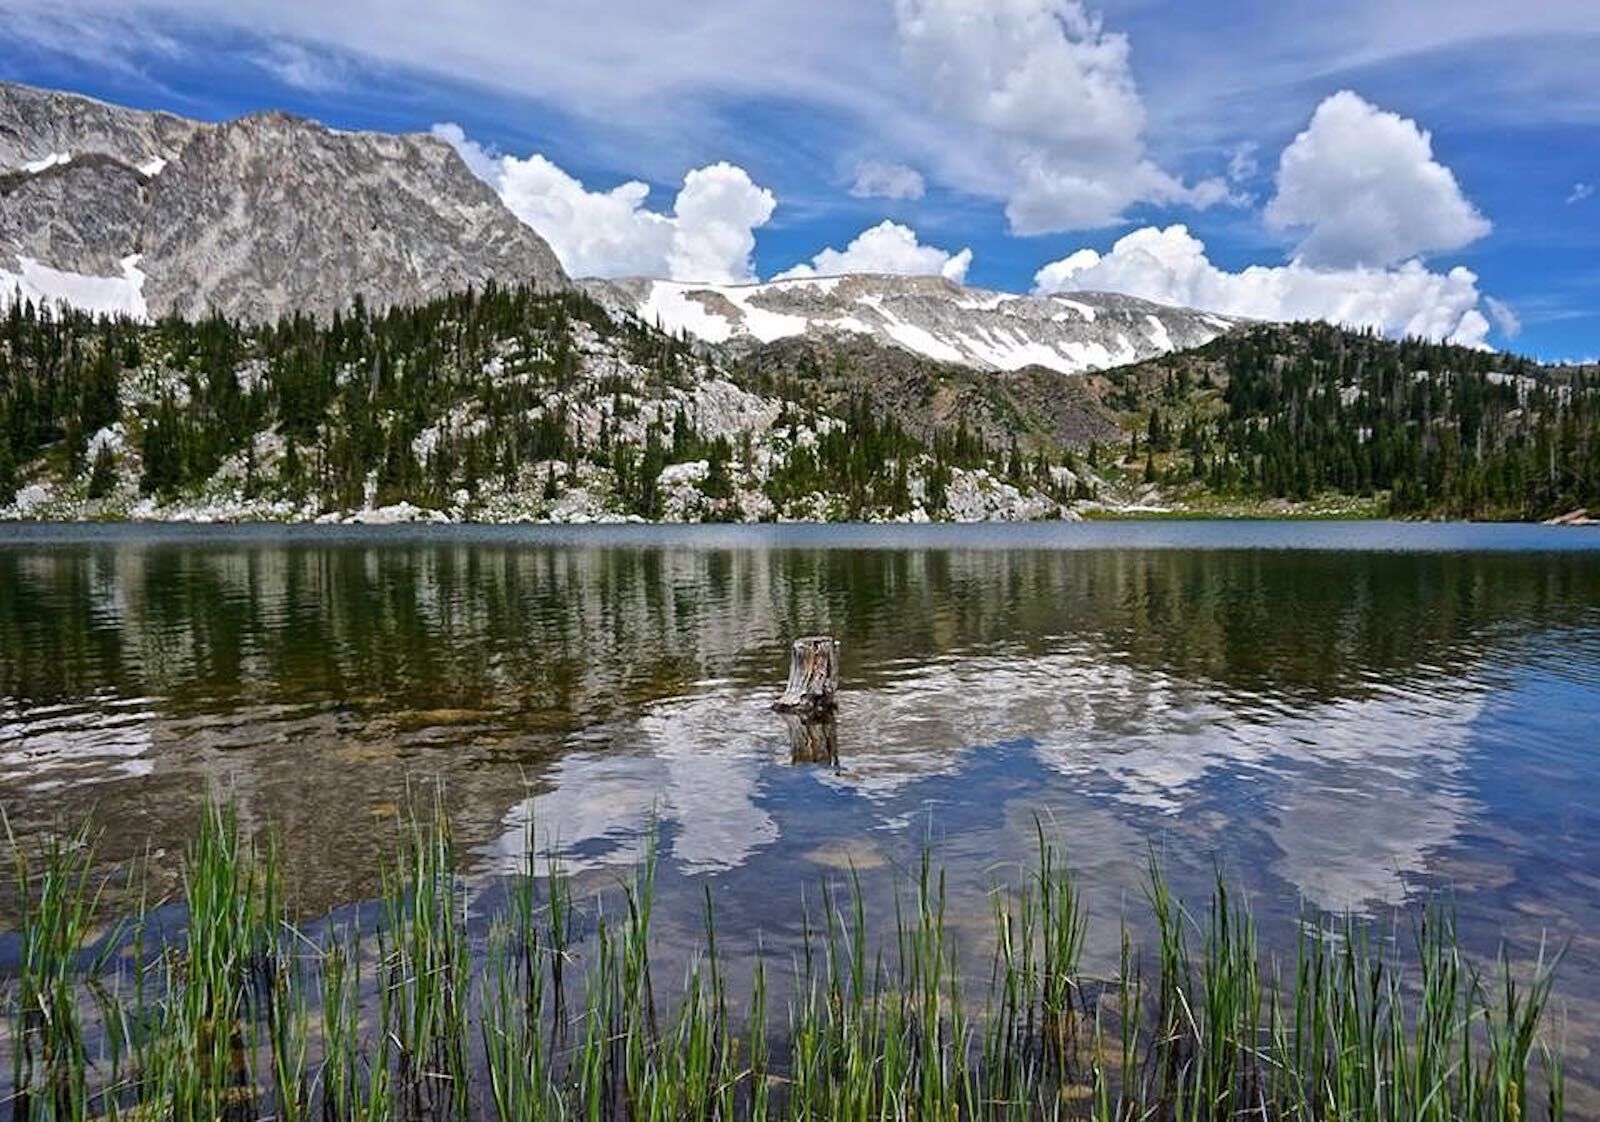 MIrror Lake, one of the best places for recreation on a lake in wyoming